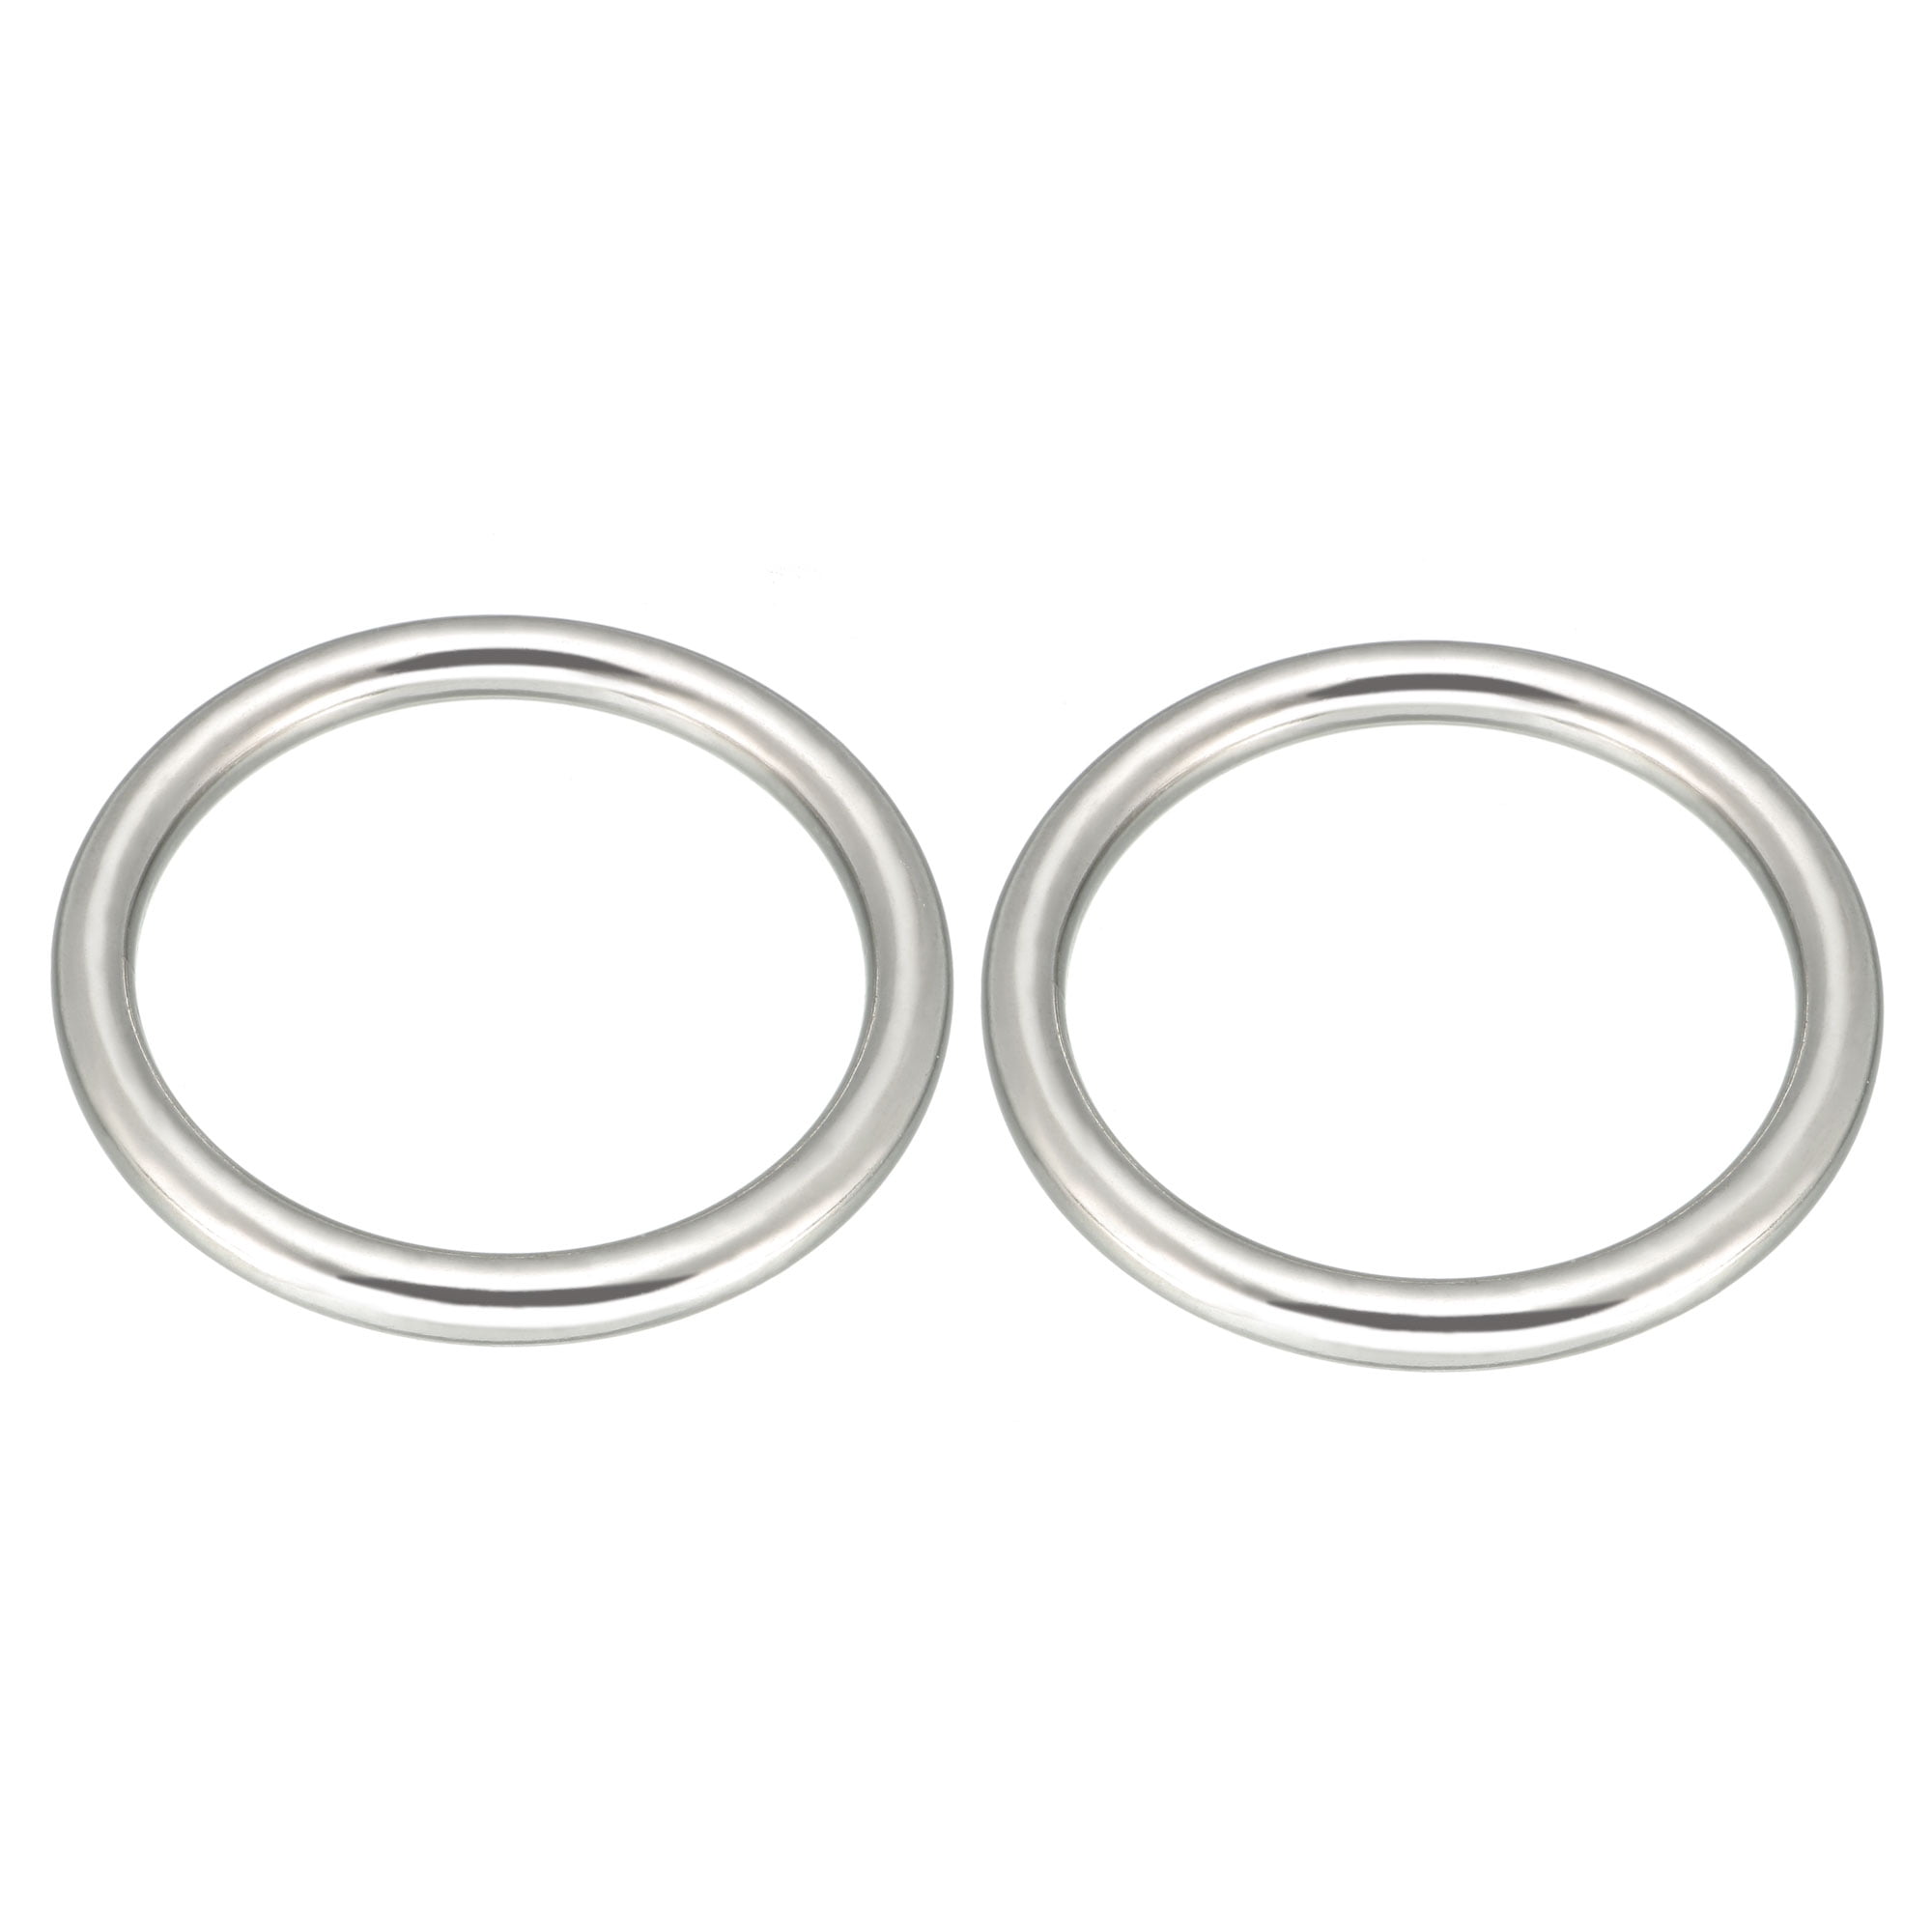 2 Pcs Multi-Purpose Metal O Ring Buckle Welded 50x40x5mm for Hardware ...